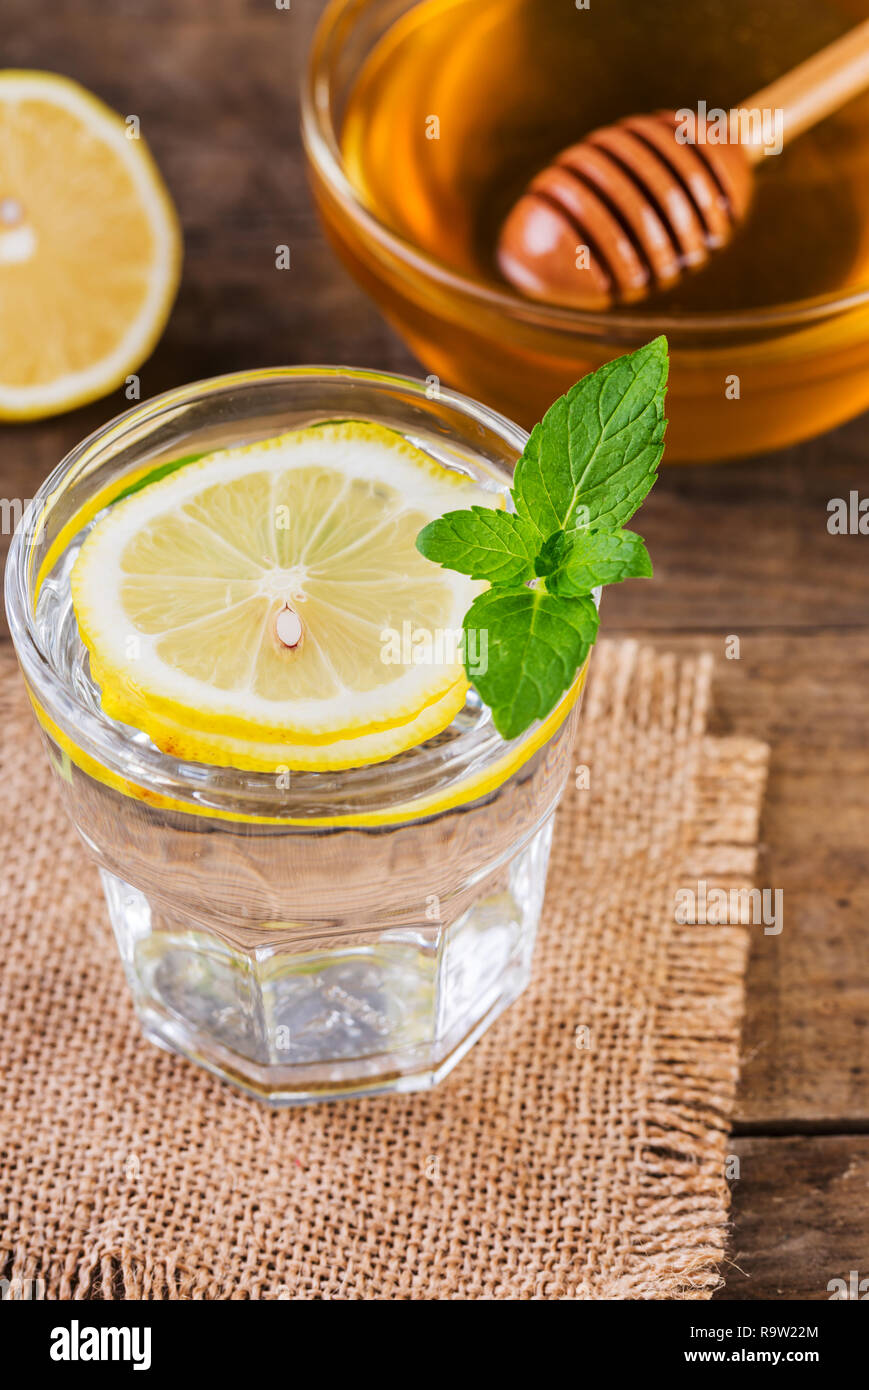 Honey and Lemon Drink. Detox water with honey, lemon and mint, Health and Organic. Stock Photo